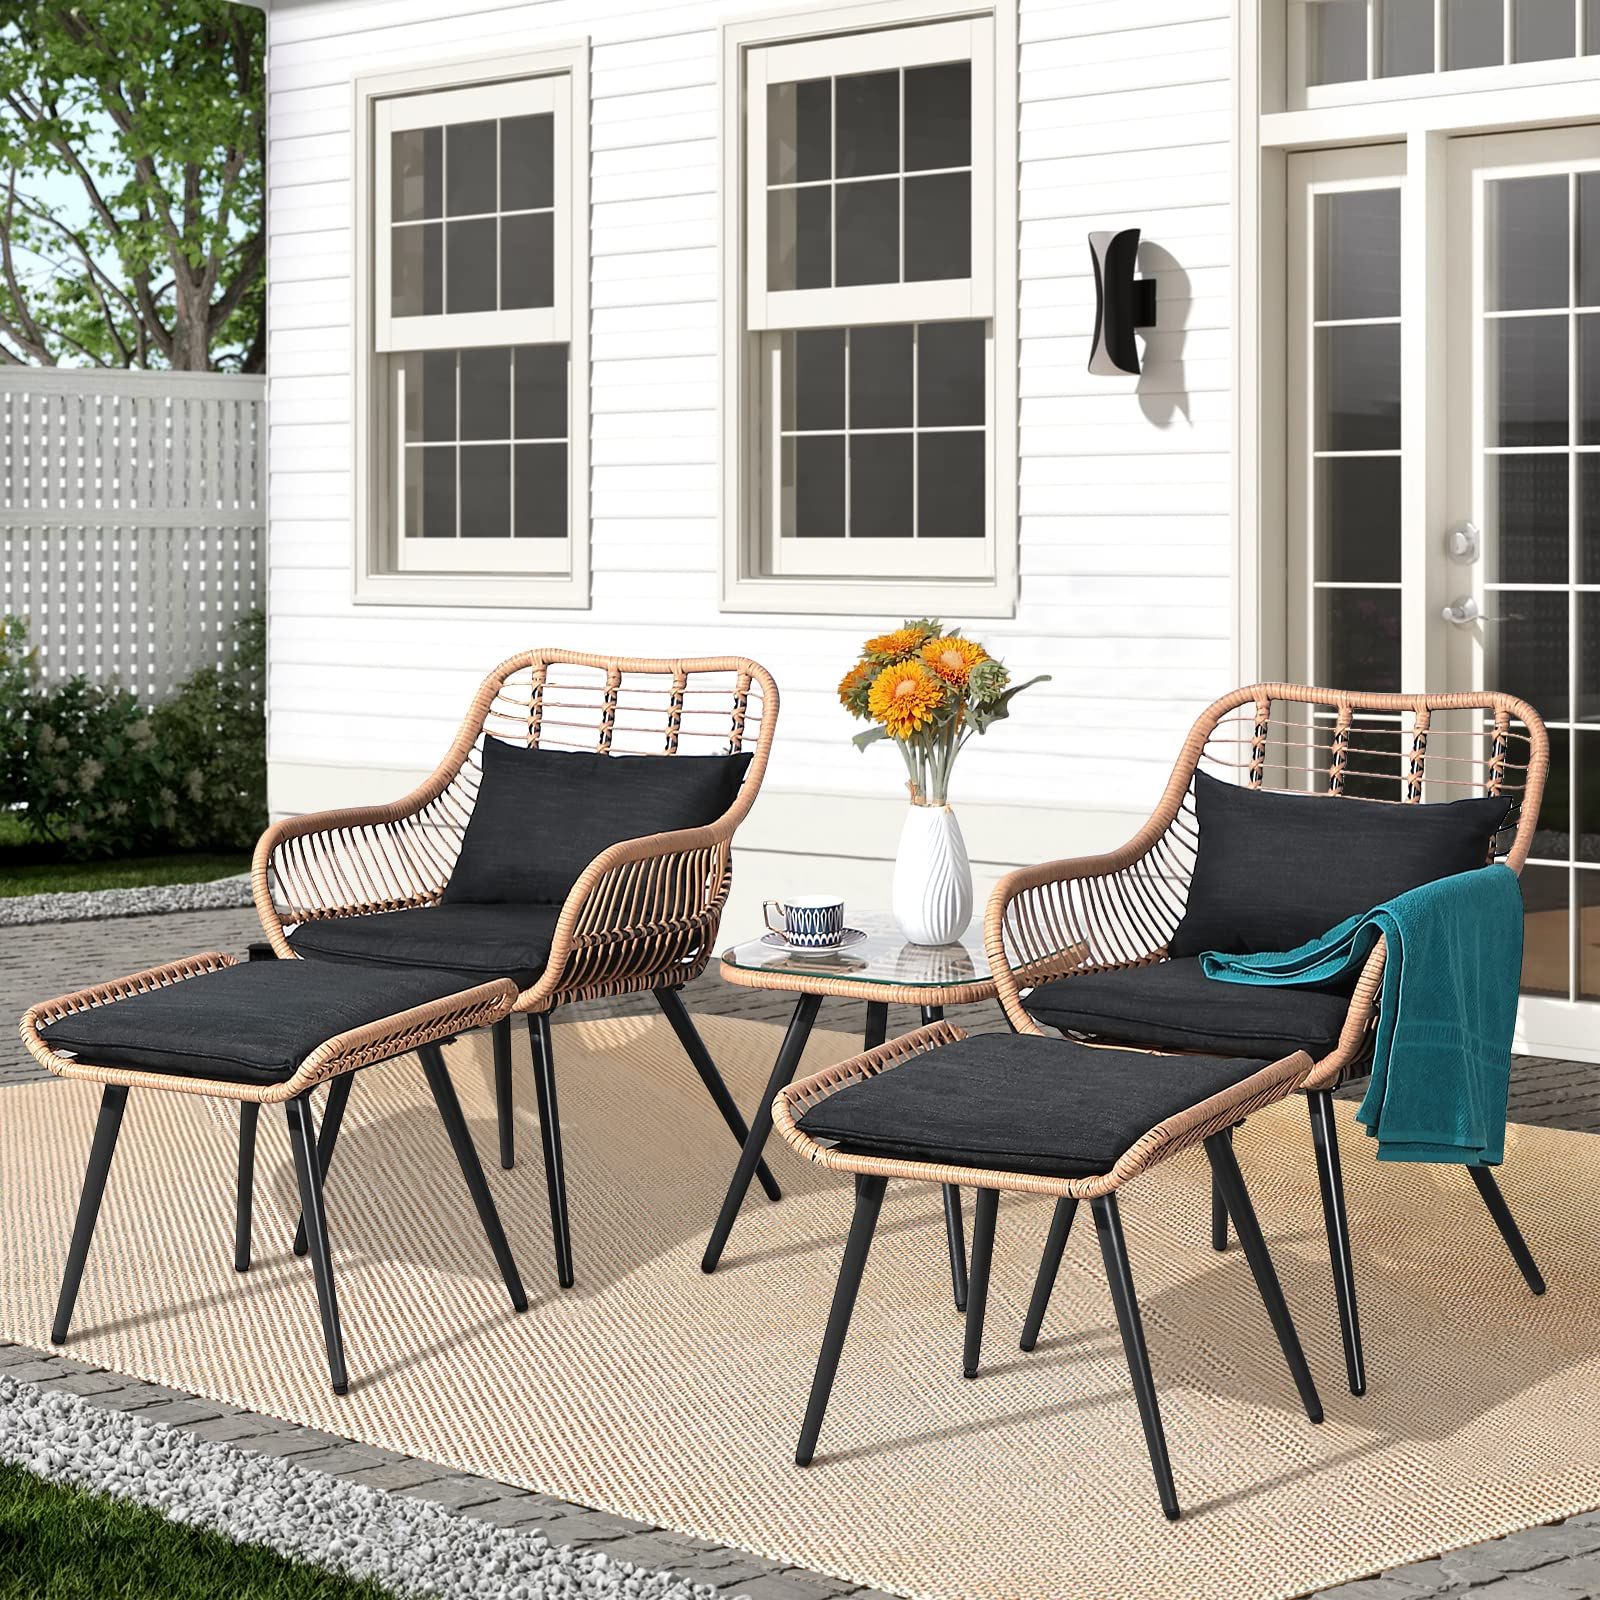 Most Recently Released 5 Piece Patio Conversation Set Regarding Amazon: Joivi 5 Piece Outdoor Patio Furniture Set, Pe Rattan Wicker  Small Patio Conversation Set Porch Furniture, Cushioned Patio Chairs With  Ottomans And Side Table : Patio, Lawn & Garden (View 4 of 15)